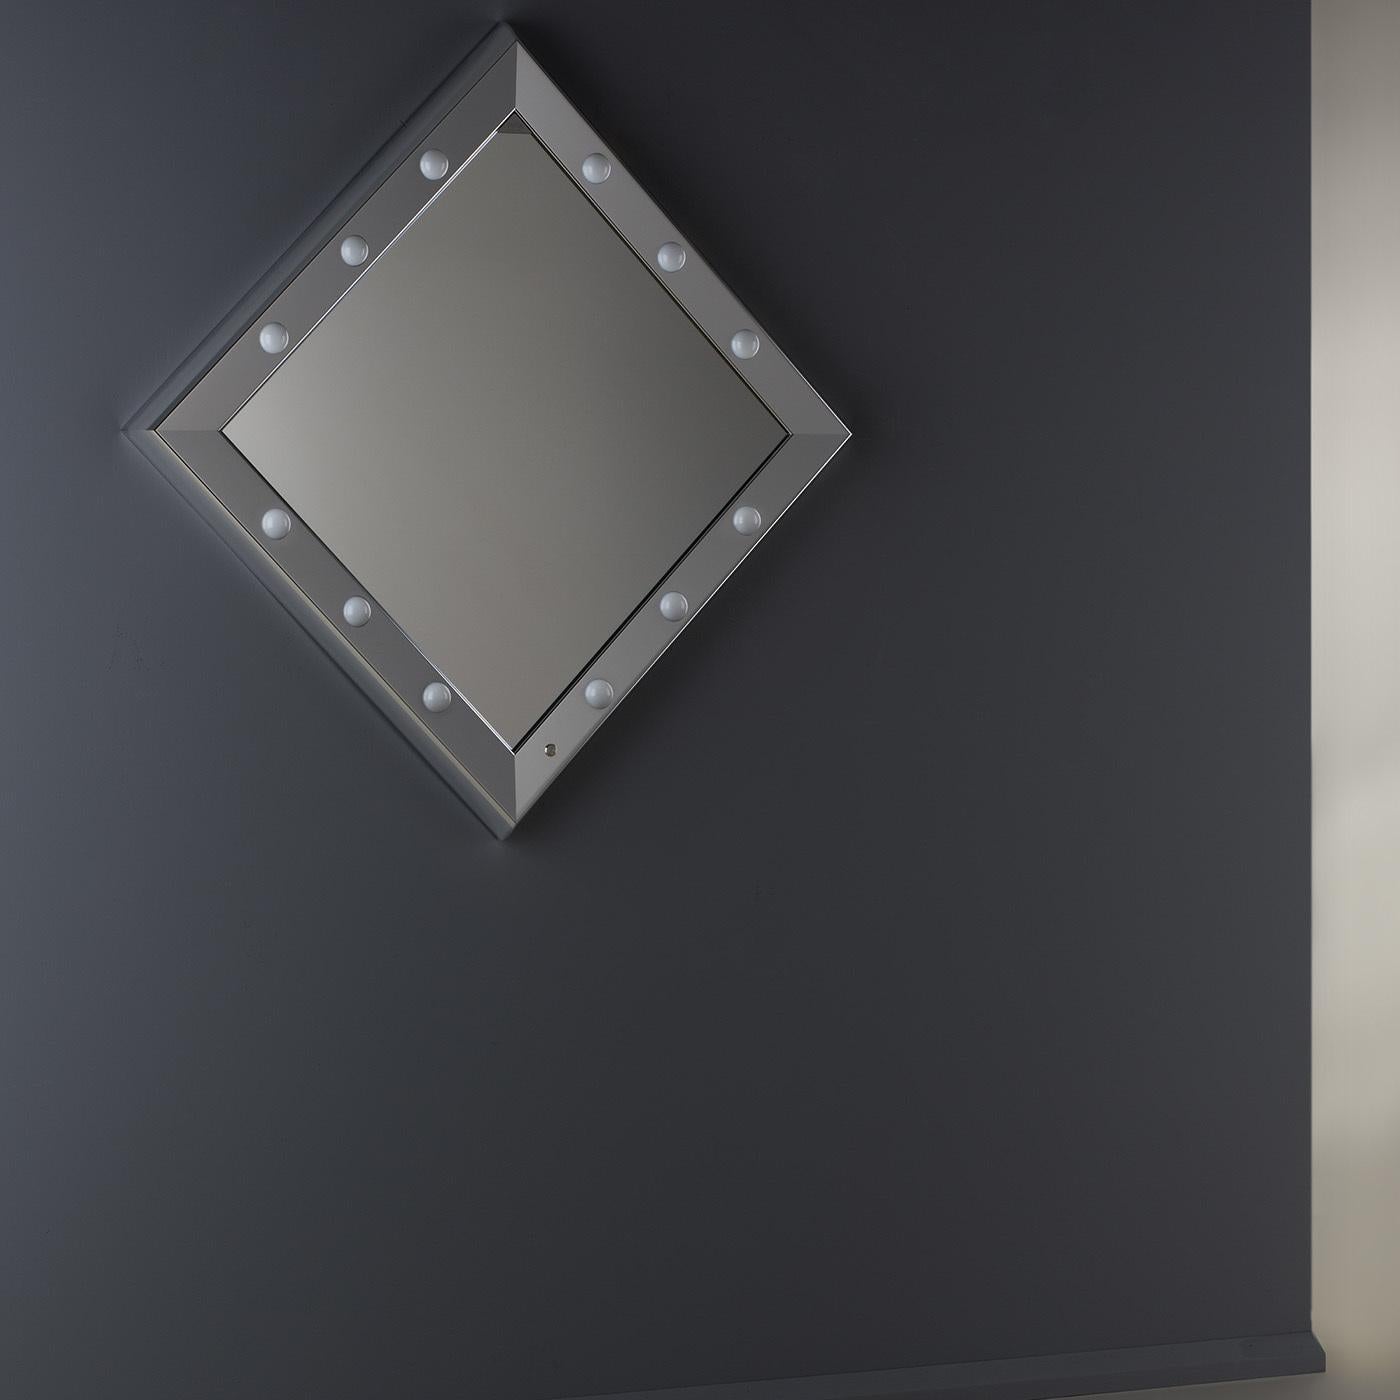 The high-tech features and classic shape of this stunning lighted mirror from the SP line will add brilliance and style to any interior.  The opal lenses diffusing the six I-light light enrich with reflections the polished geometric surfaces of the